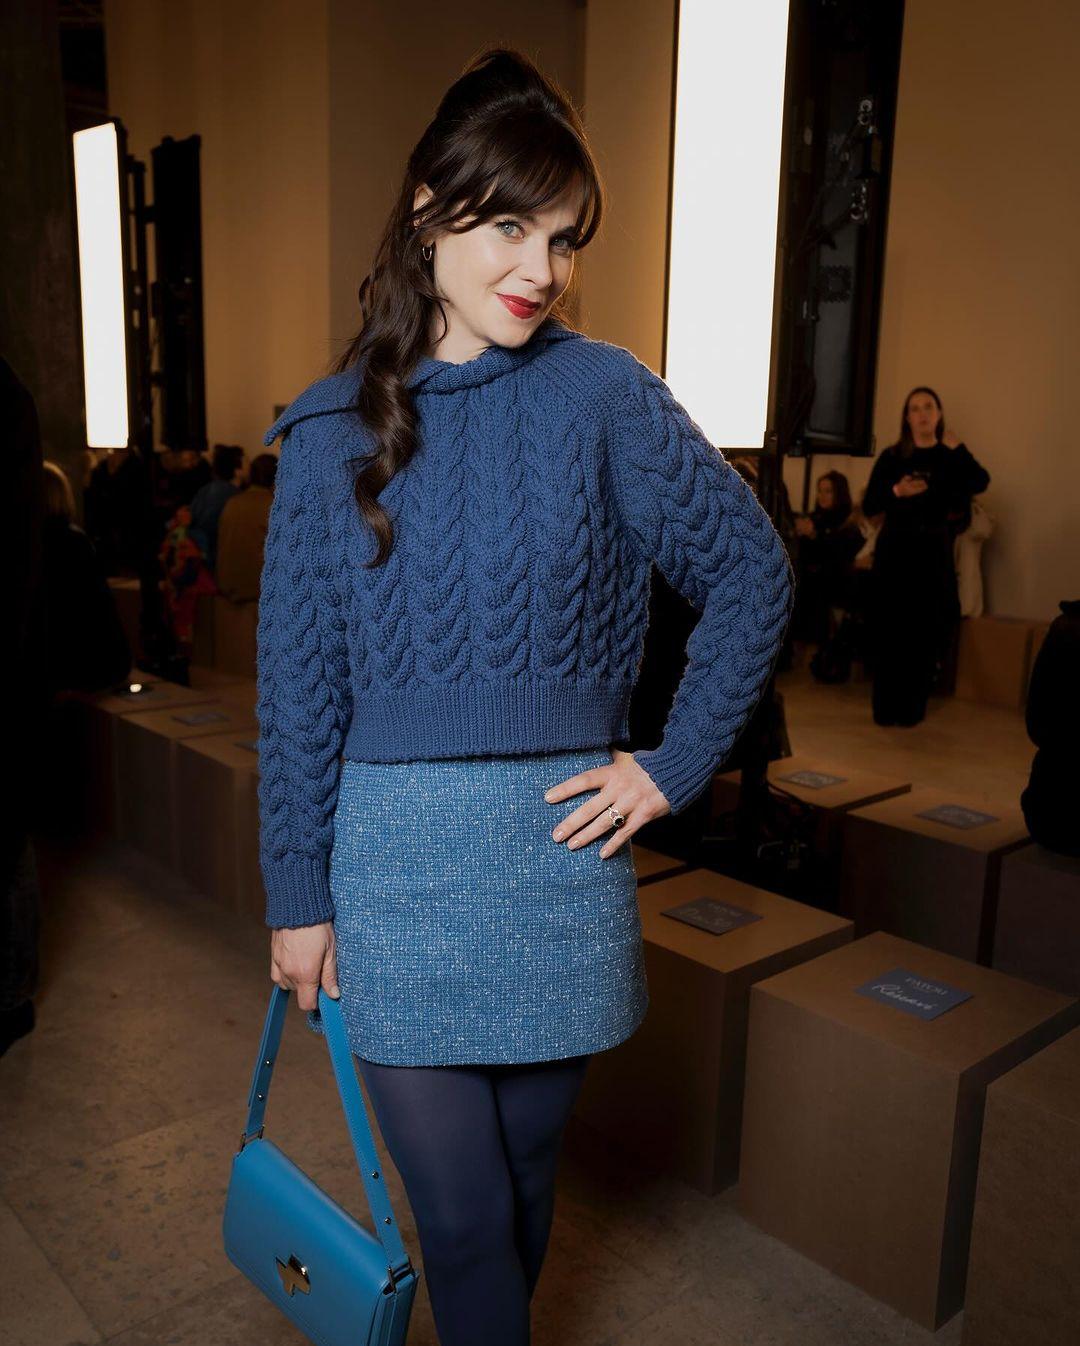 The New Girl star made a fashionable statement at the Patou show, donning different shades of blue from top to bottom. She paired a chunky cobalt blue crewneck sweater with a lighter blue tweed miniskirt. Completing the look, she chose blue patent leather ankle-strap heels and carried a chic cerulean shoulder bag with gold hardware.